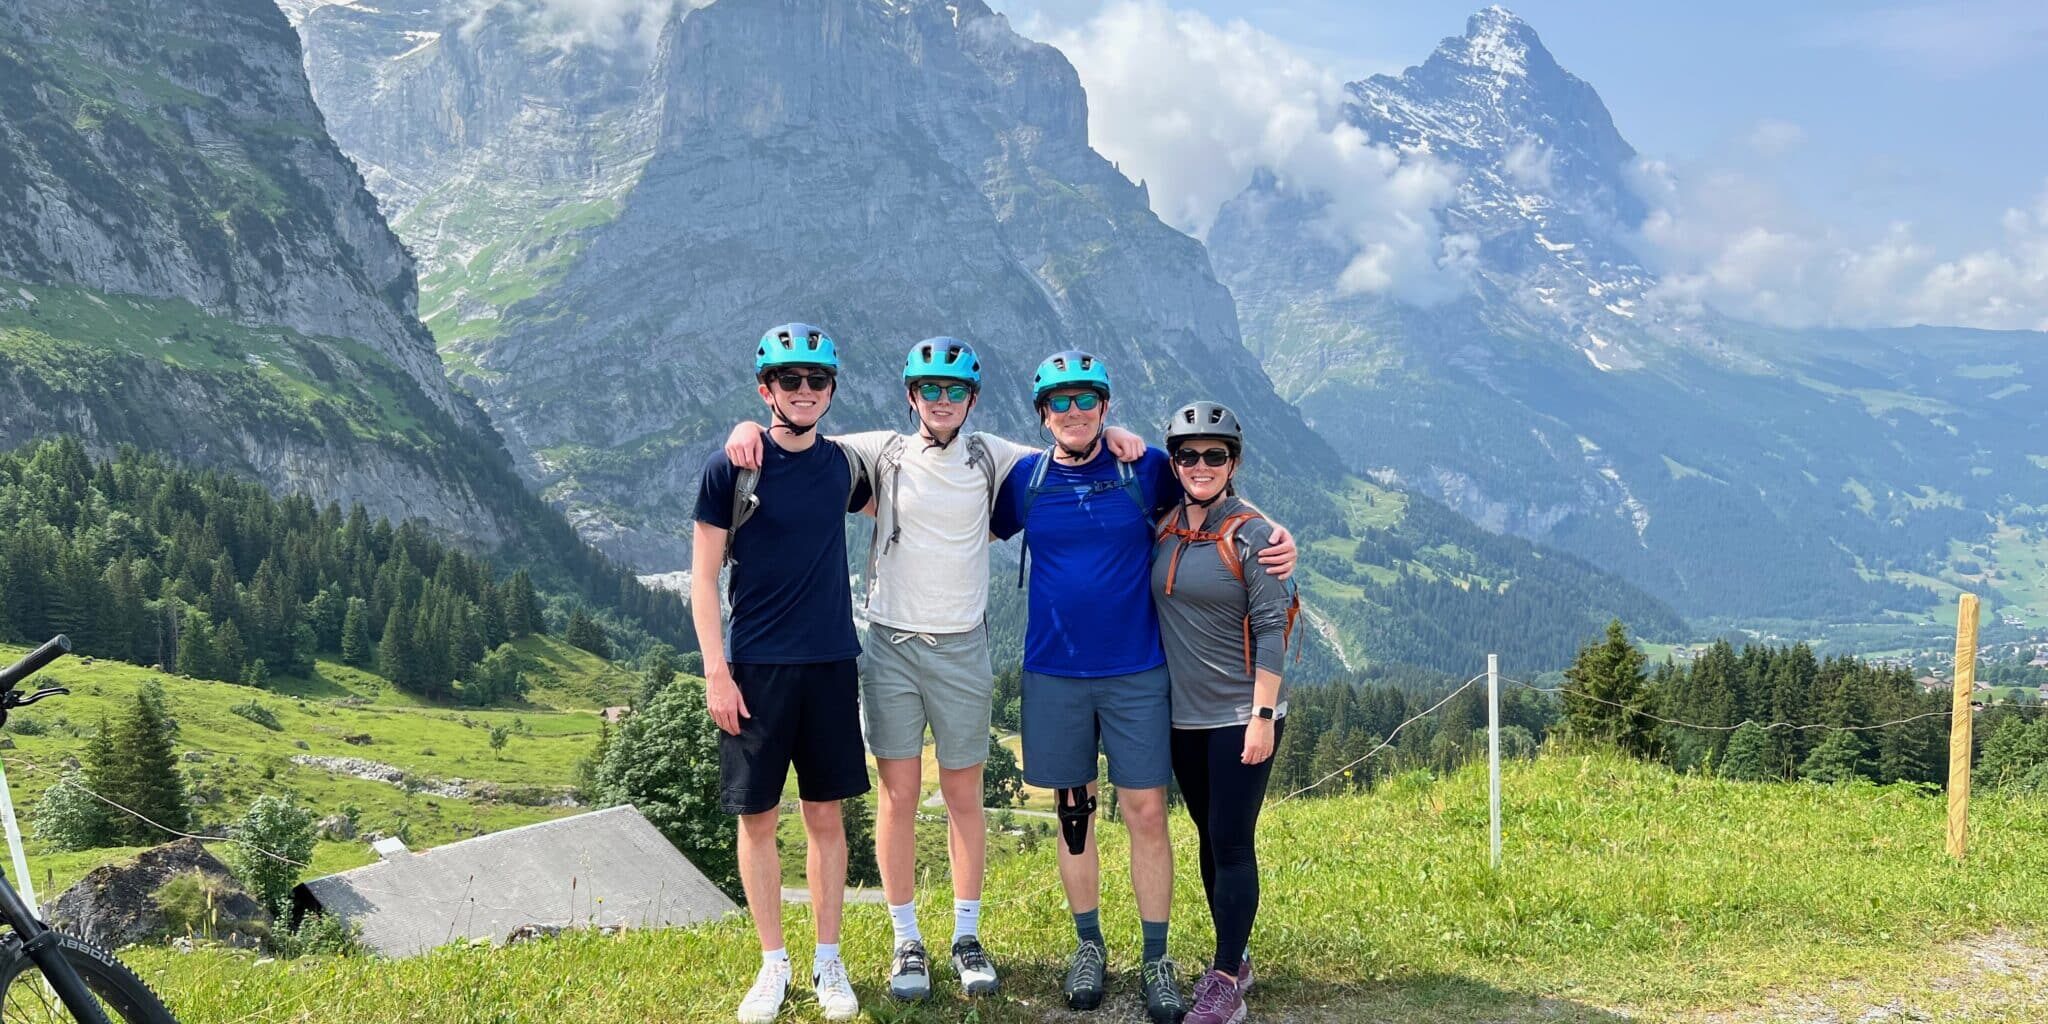 We rented e-bikes in Grindelwald and had the most spectacular ride up up up to First. One of our favorite experiences together. 